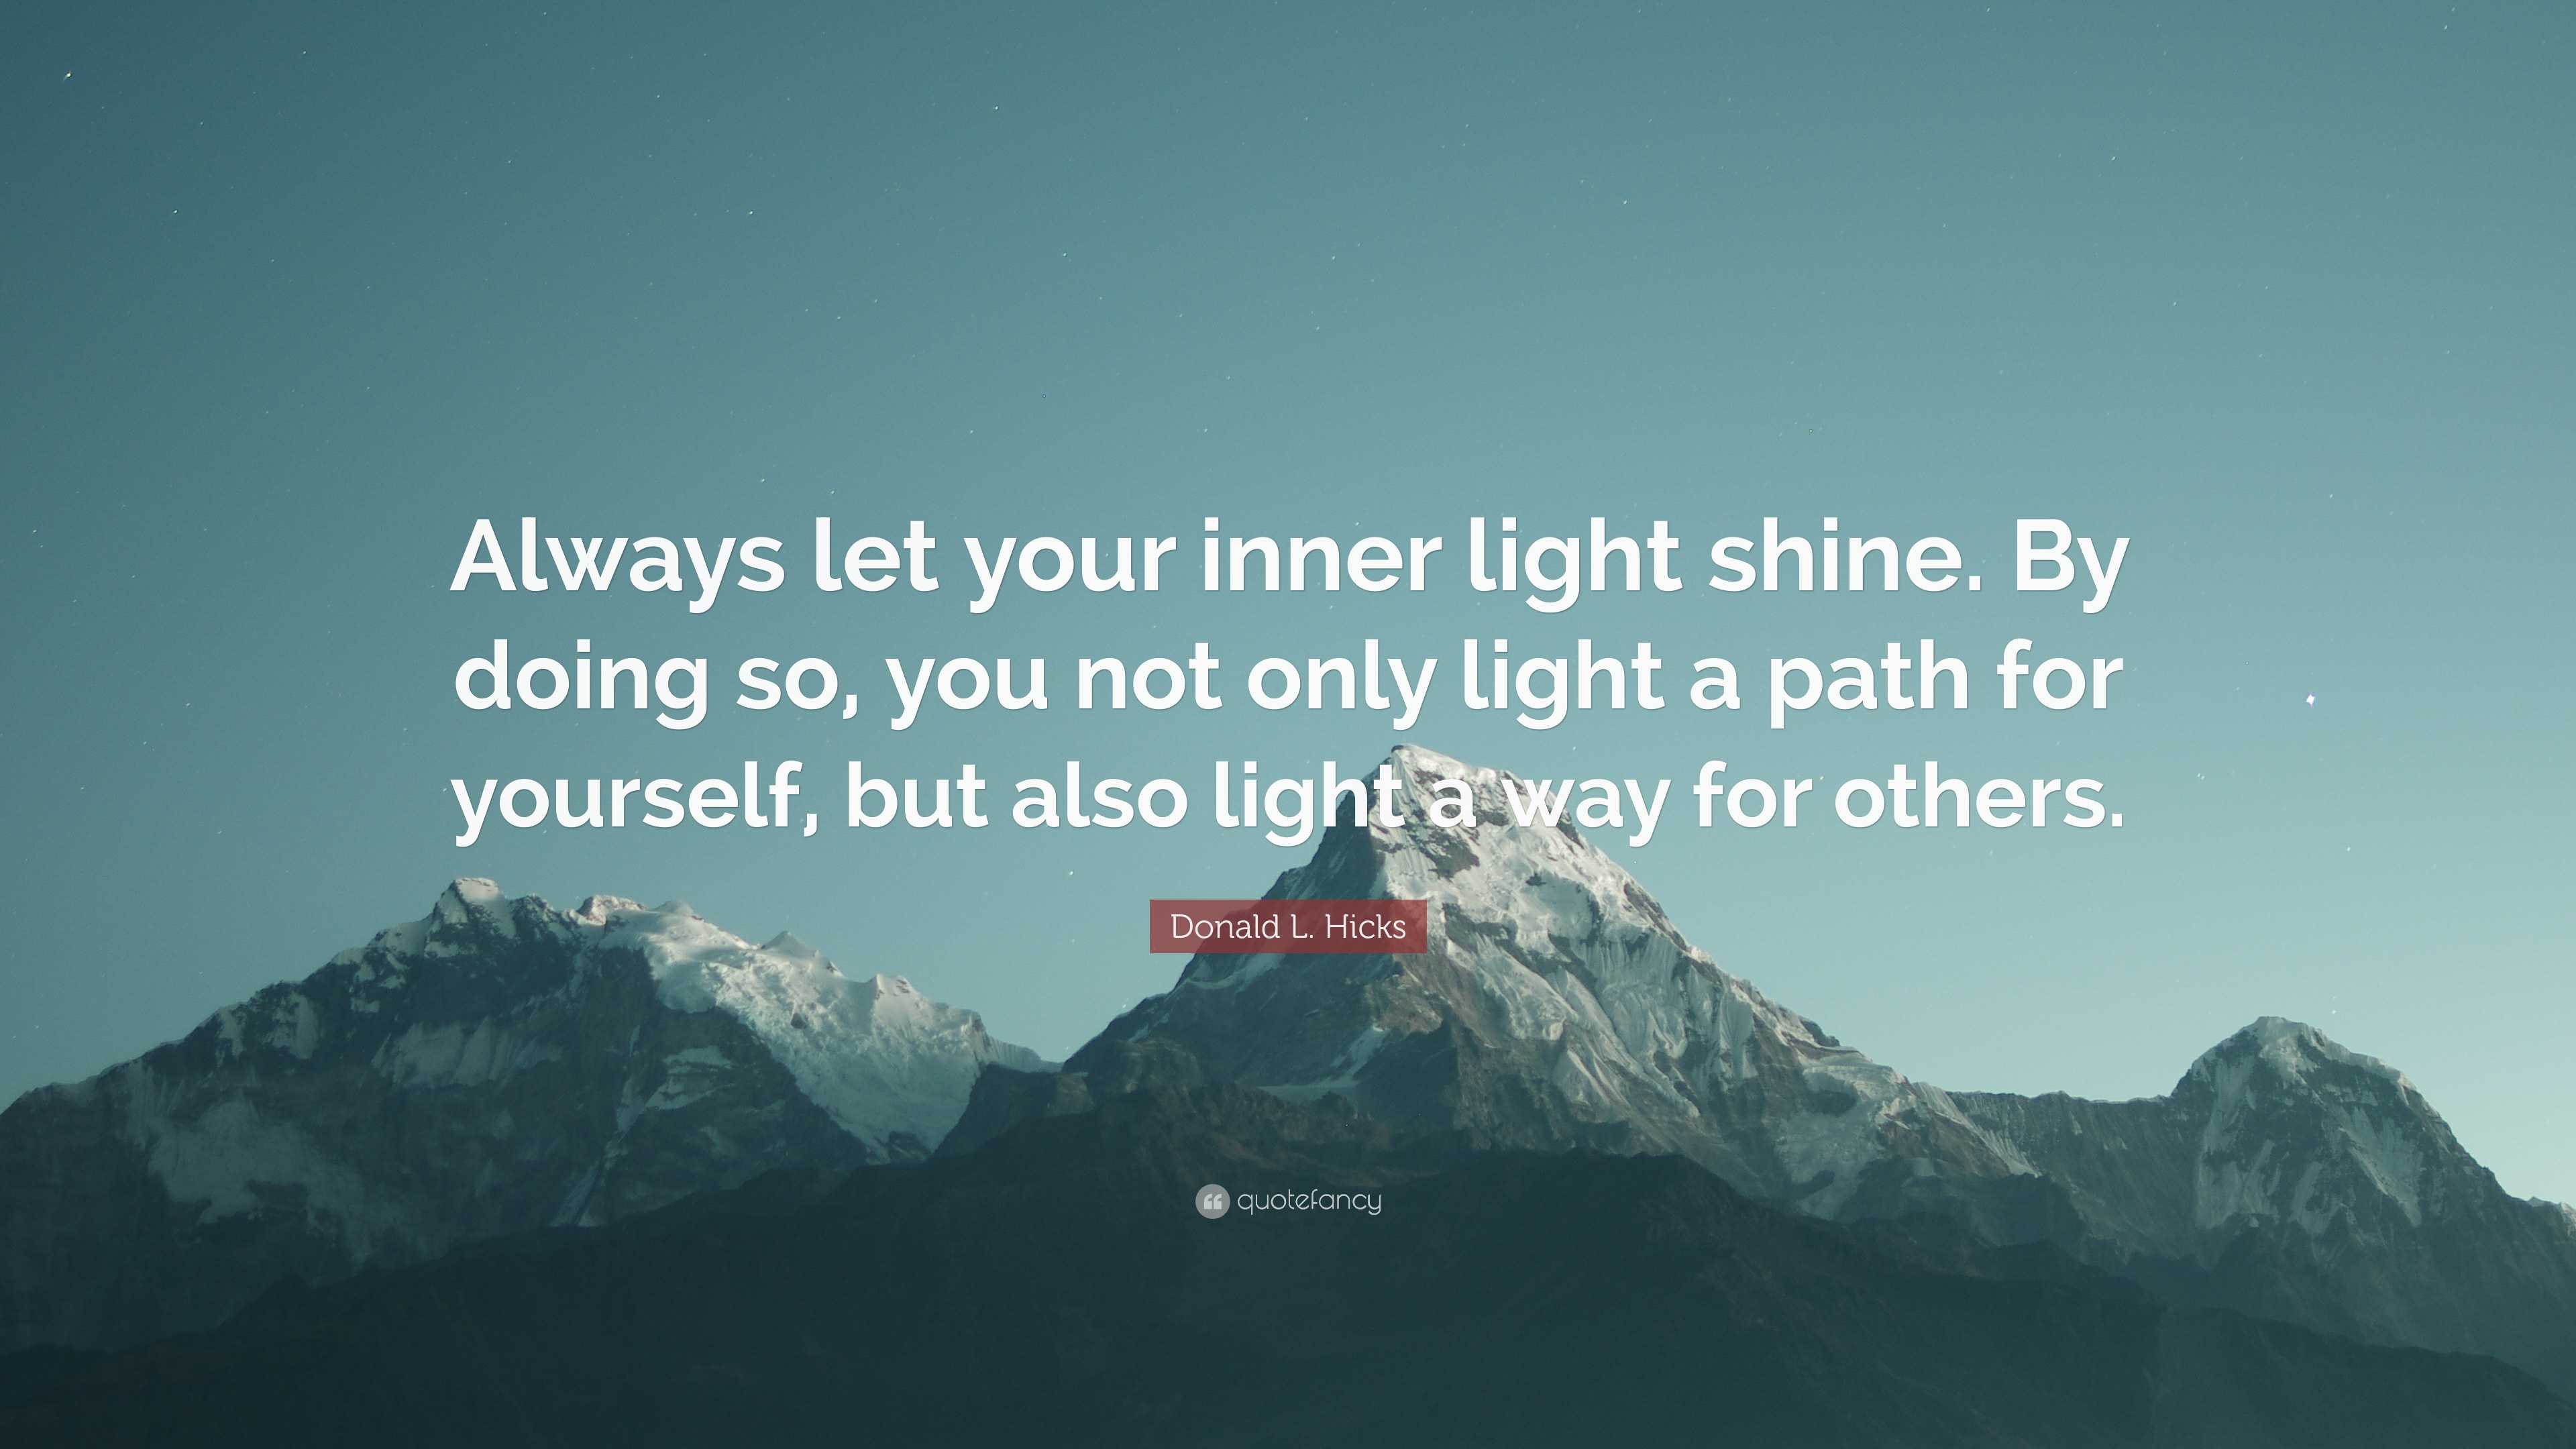 Donald L. Hicks Quote: “Always let your inner light shine. By doing so, you  not only